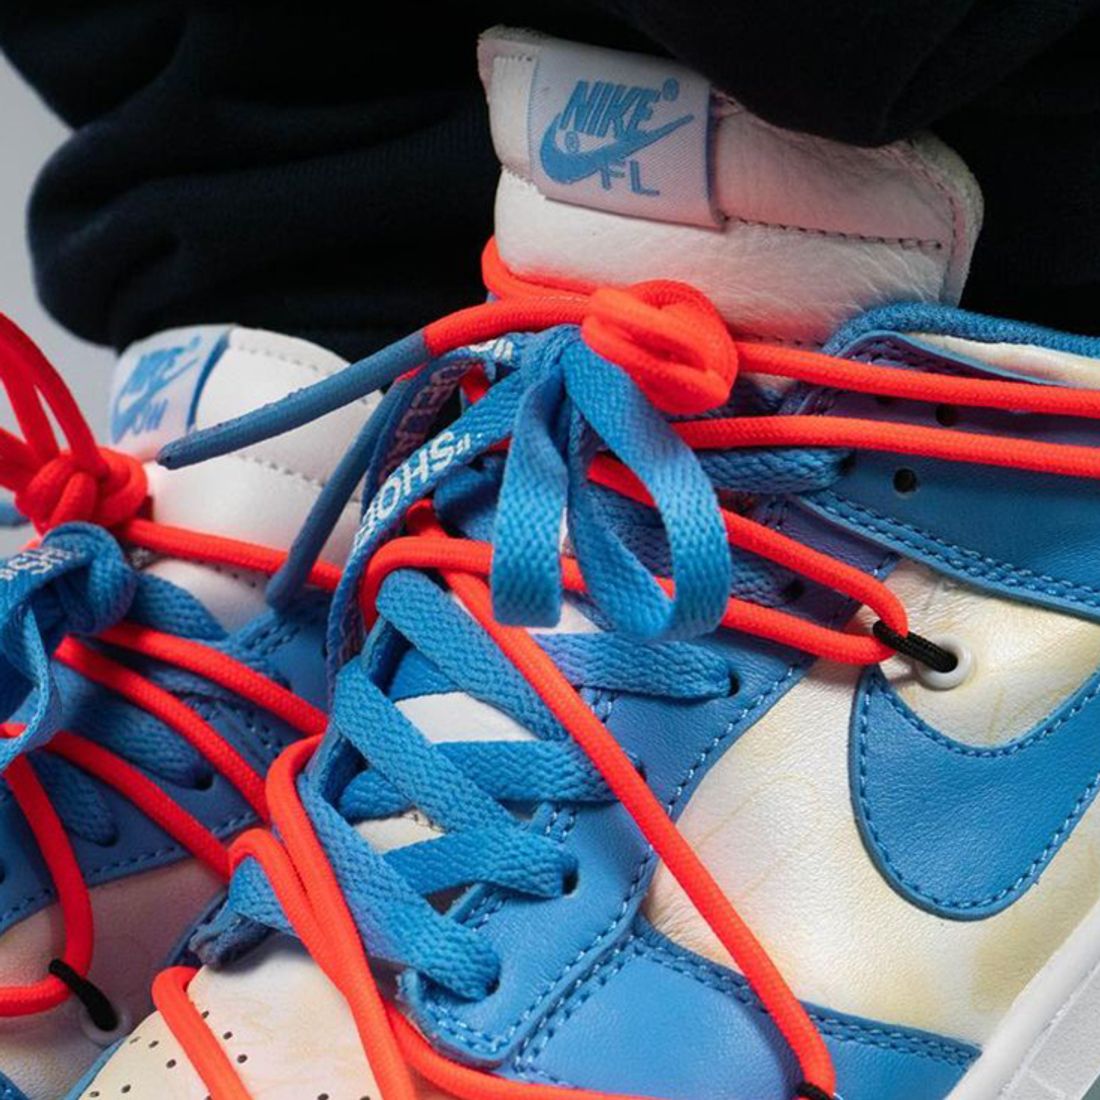 Check Out This Sample x Nike SB Dunk Low - Freaker